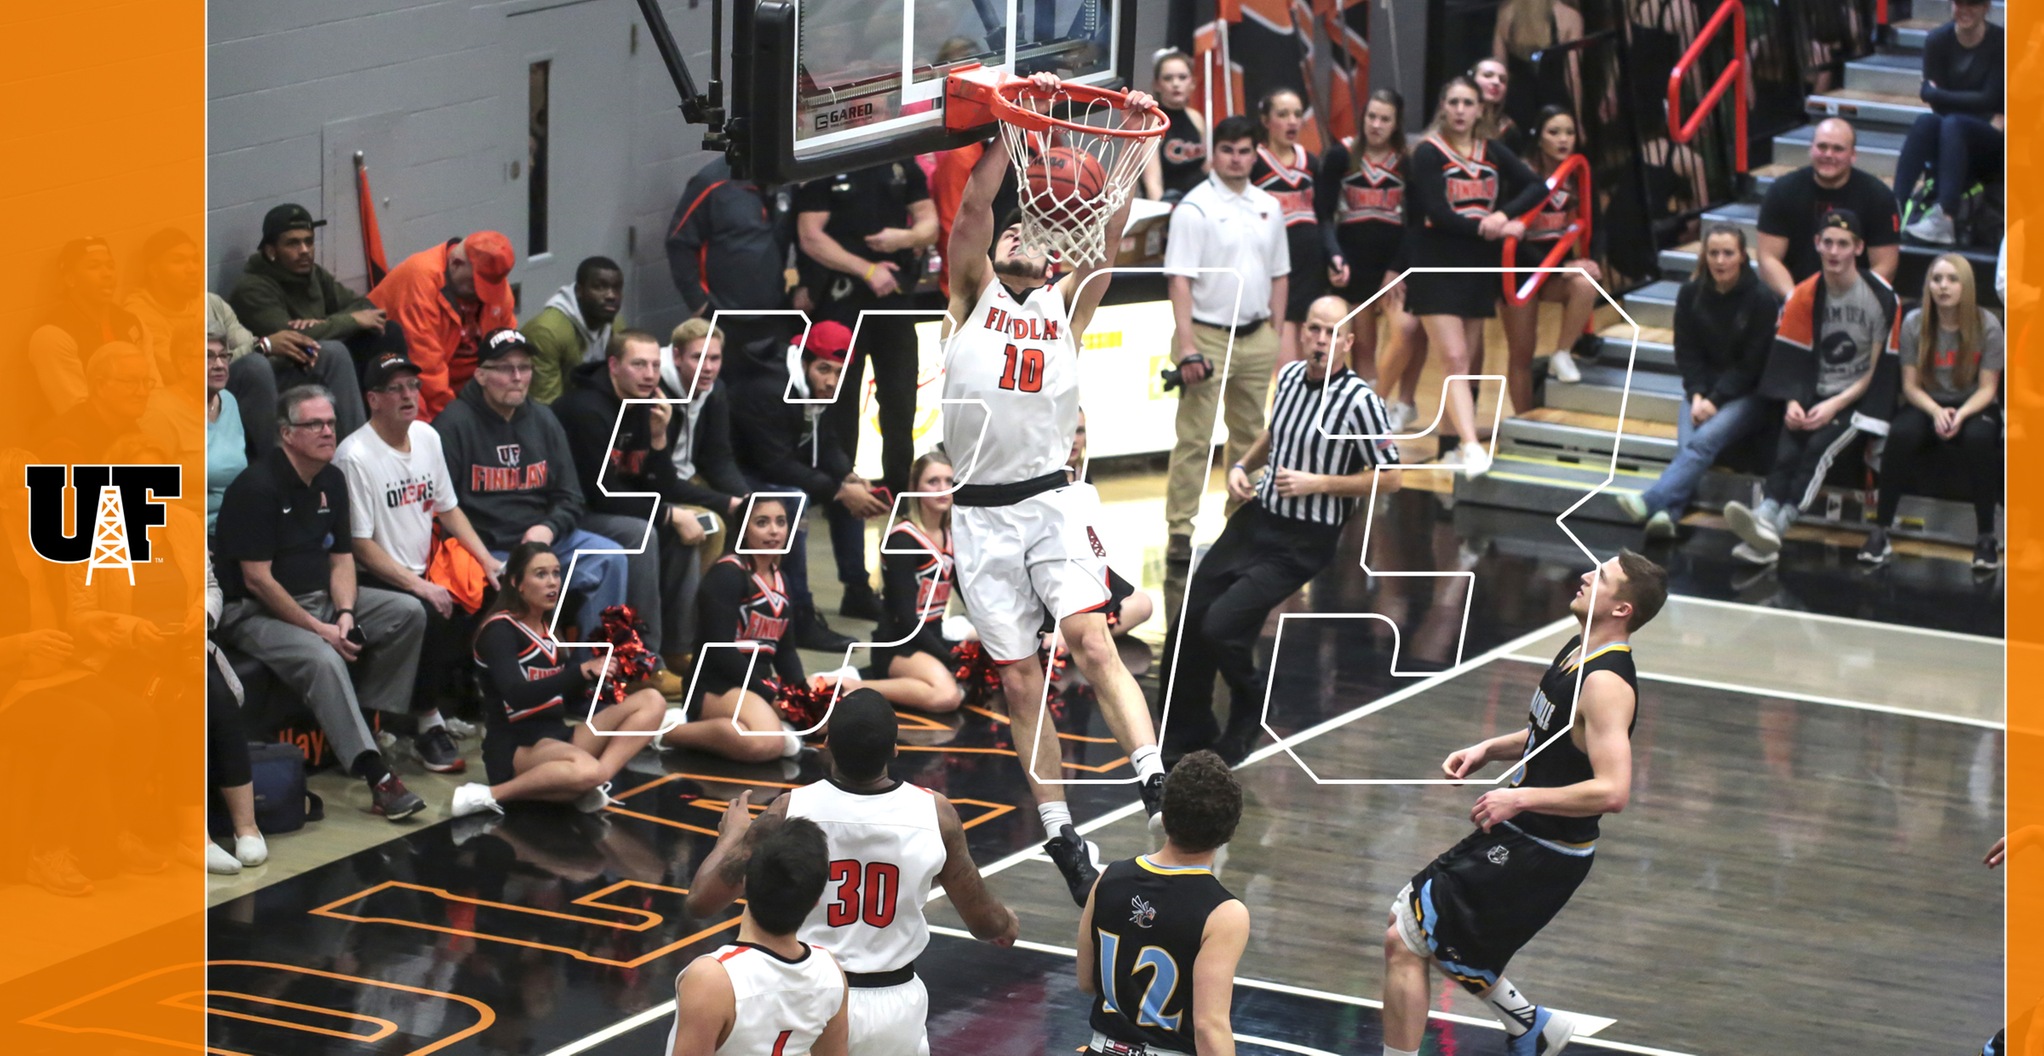 Oilers Begin Tourney Play Ranked 13th